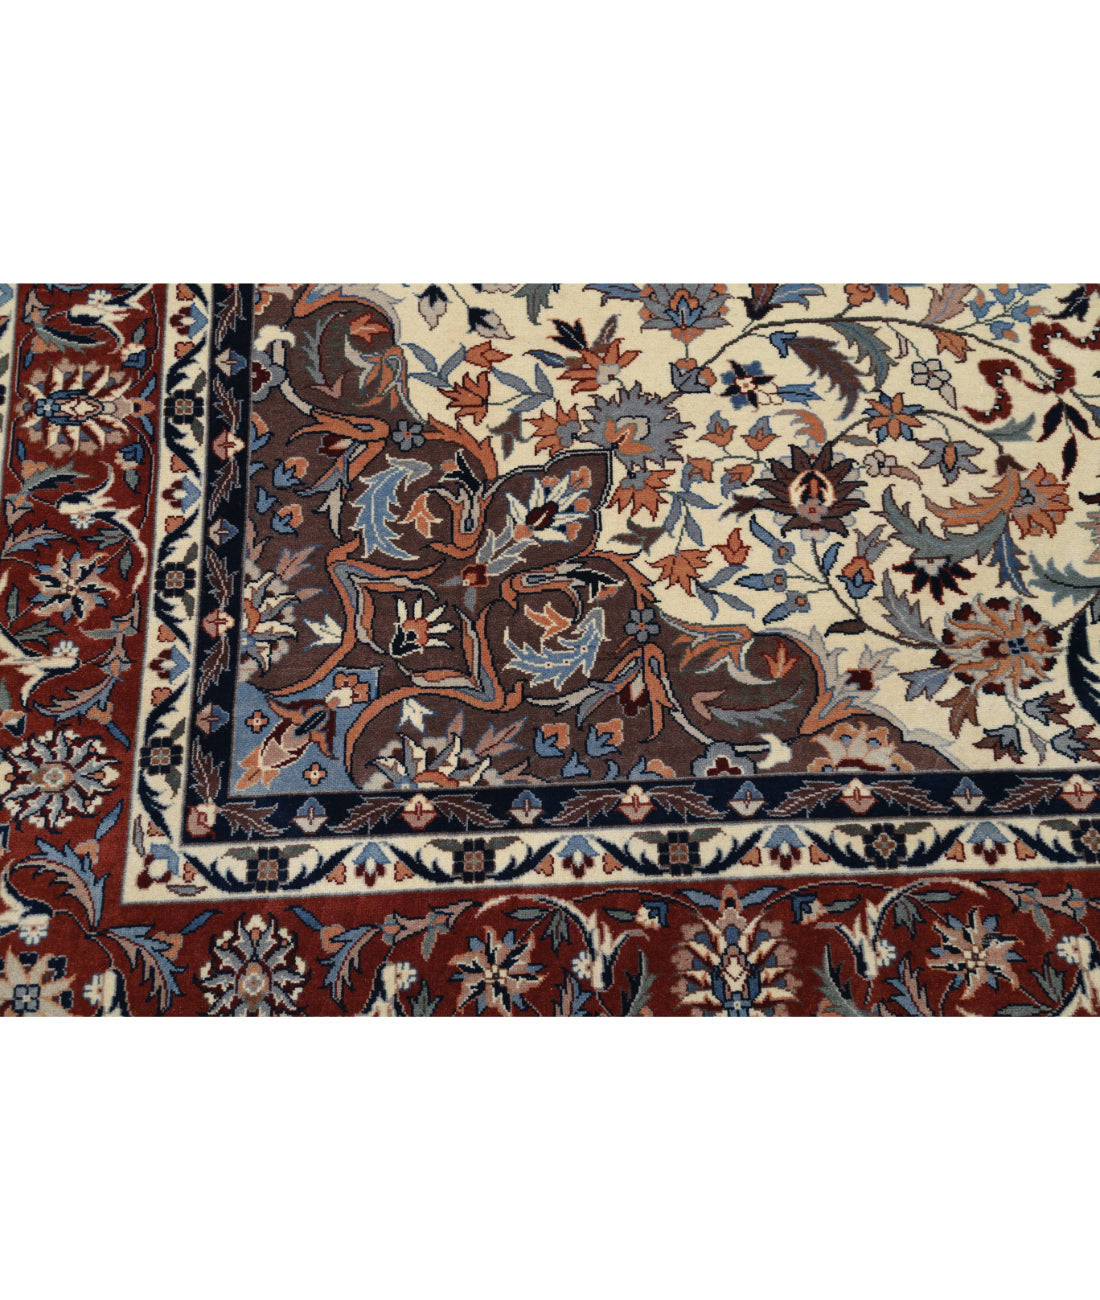 Heritage 7' 11" X 9' 10" Hand-Knotted Wool Rug 7' 11" X 9' 10" (241 X 300) / Ivory / Rust